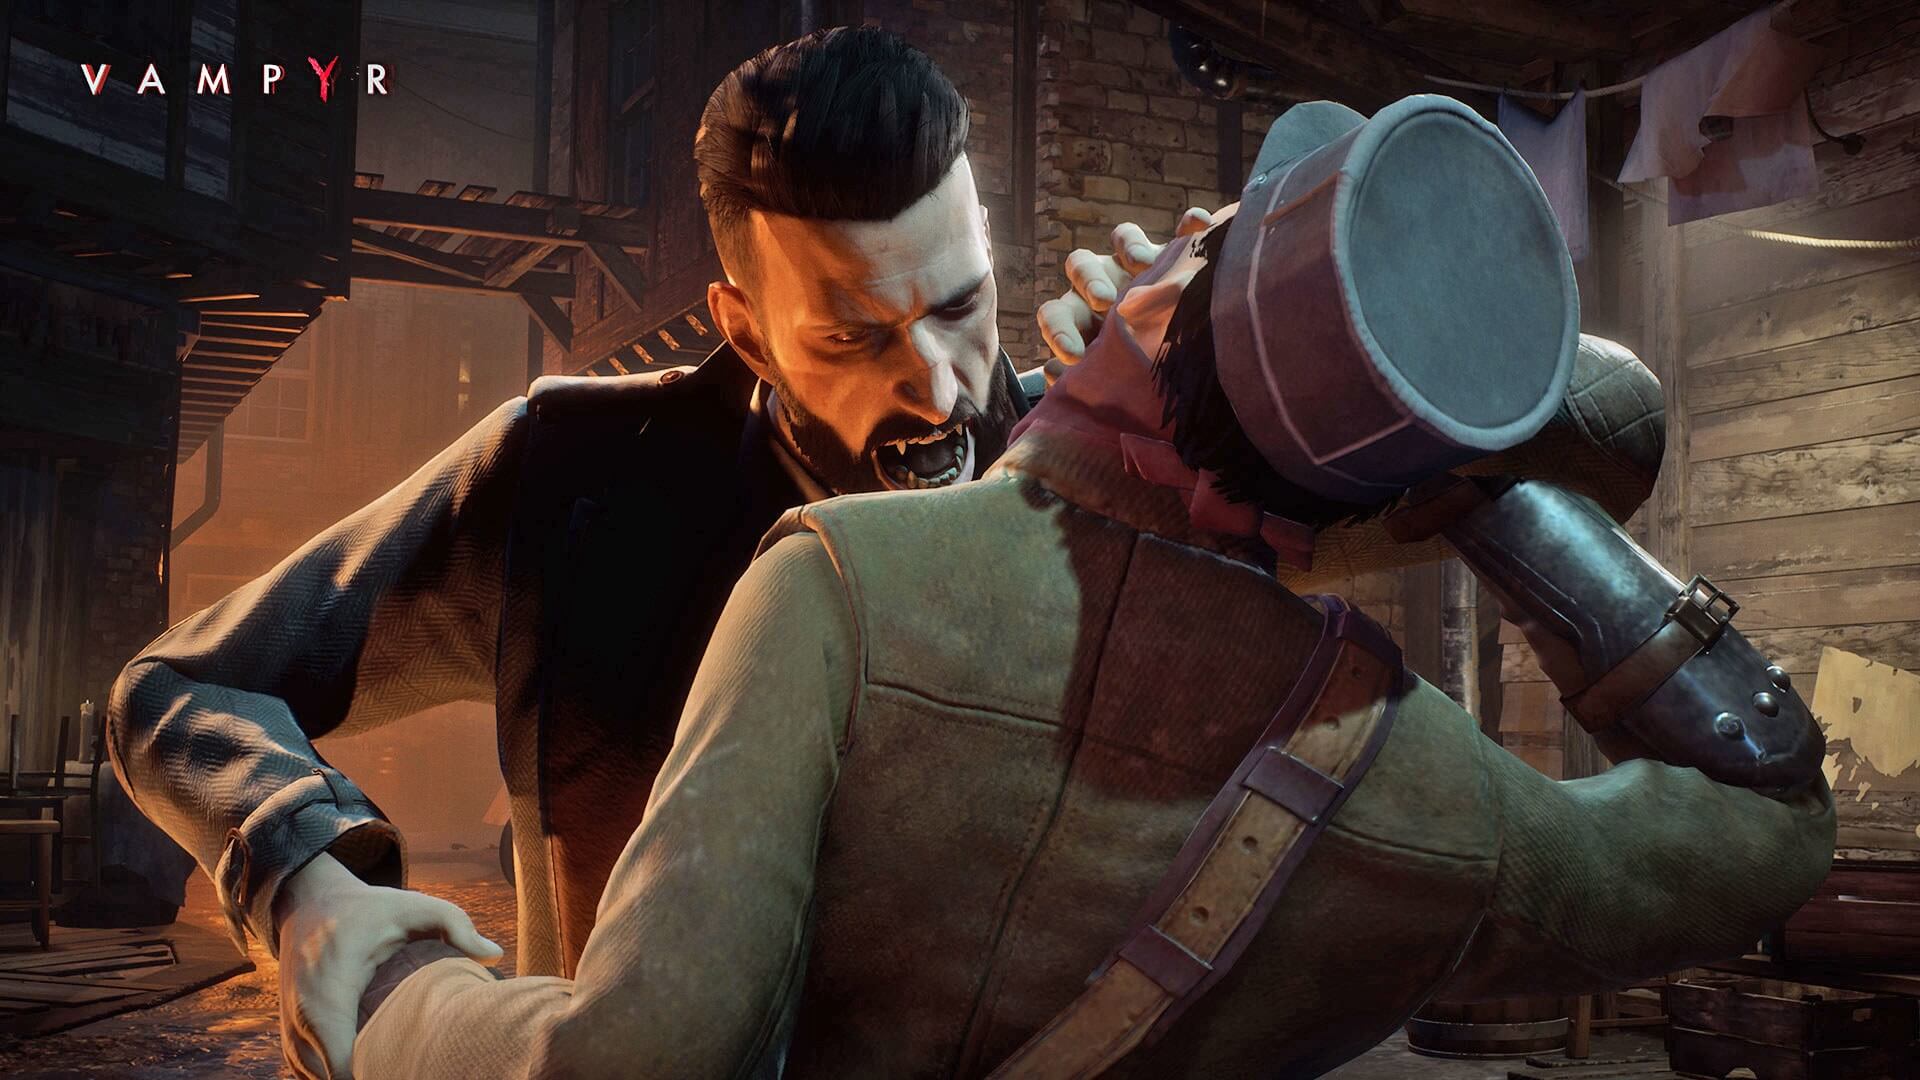 New difficulty modes and Ansel support come to Vampyr